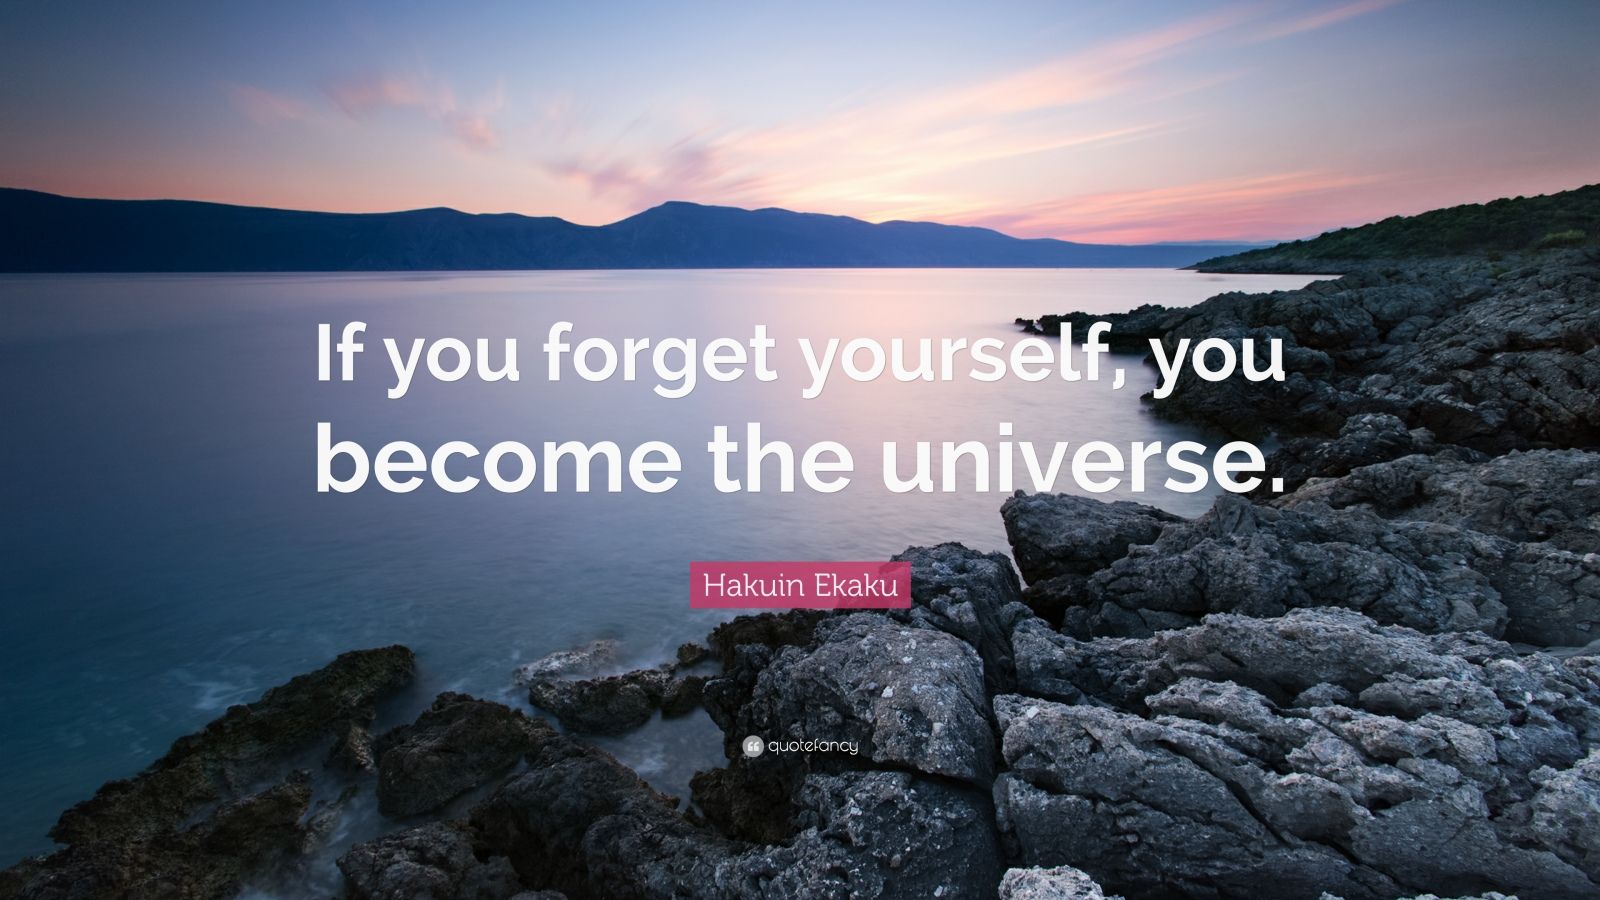 Hakuin Ekaku Quote: “If you forget yourself, you become the universe ...